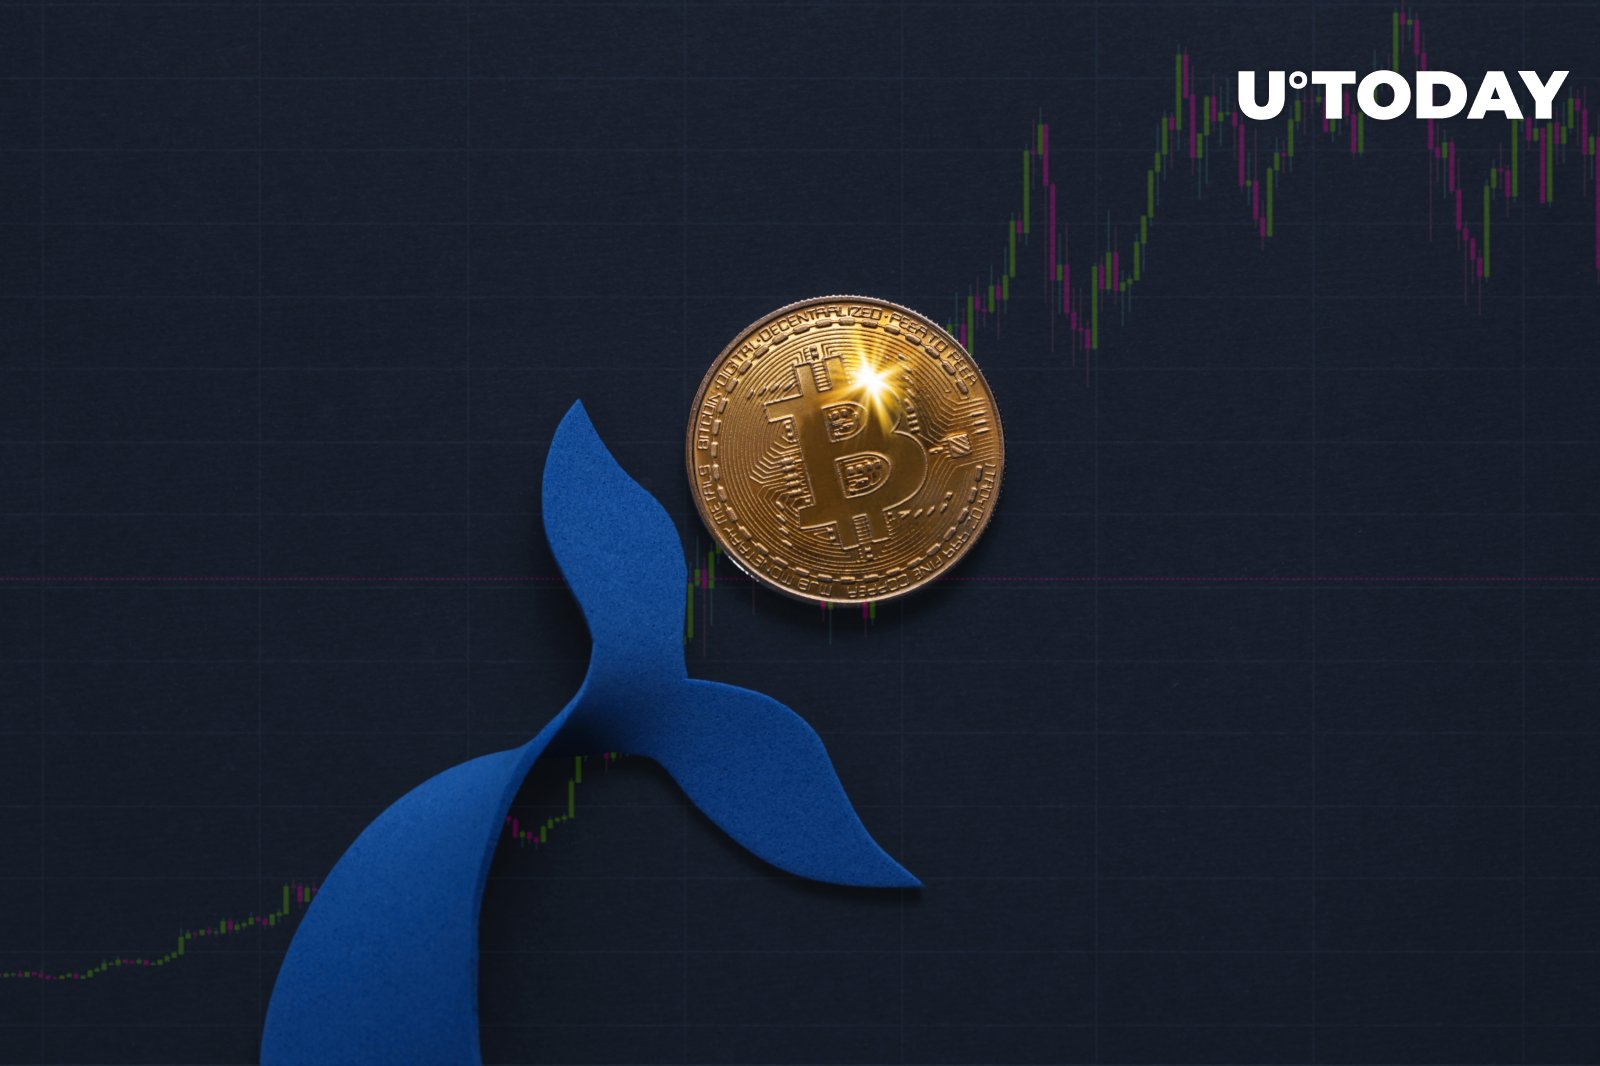 btc-whales-create-genius-plan-to-curb-losses-analyst-says